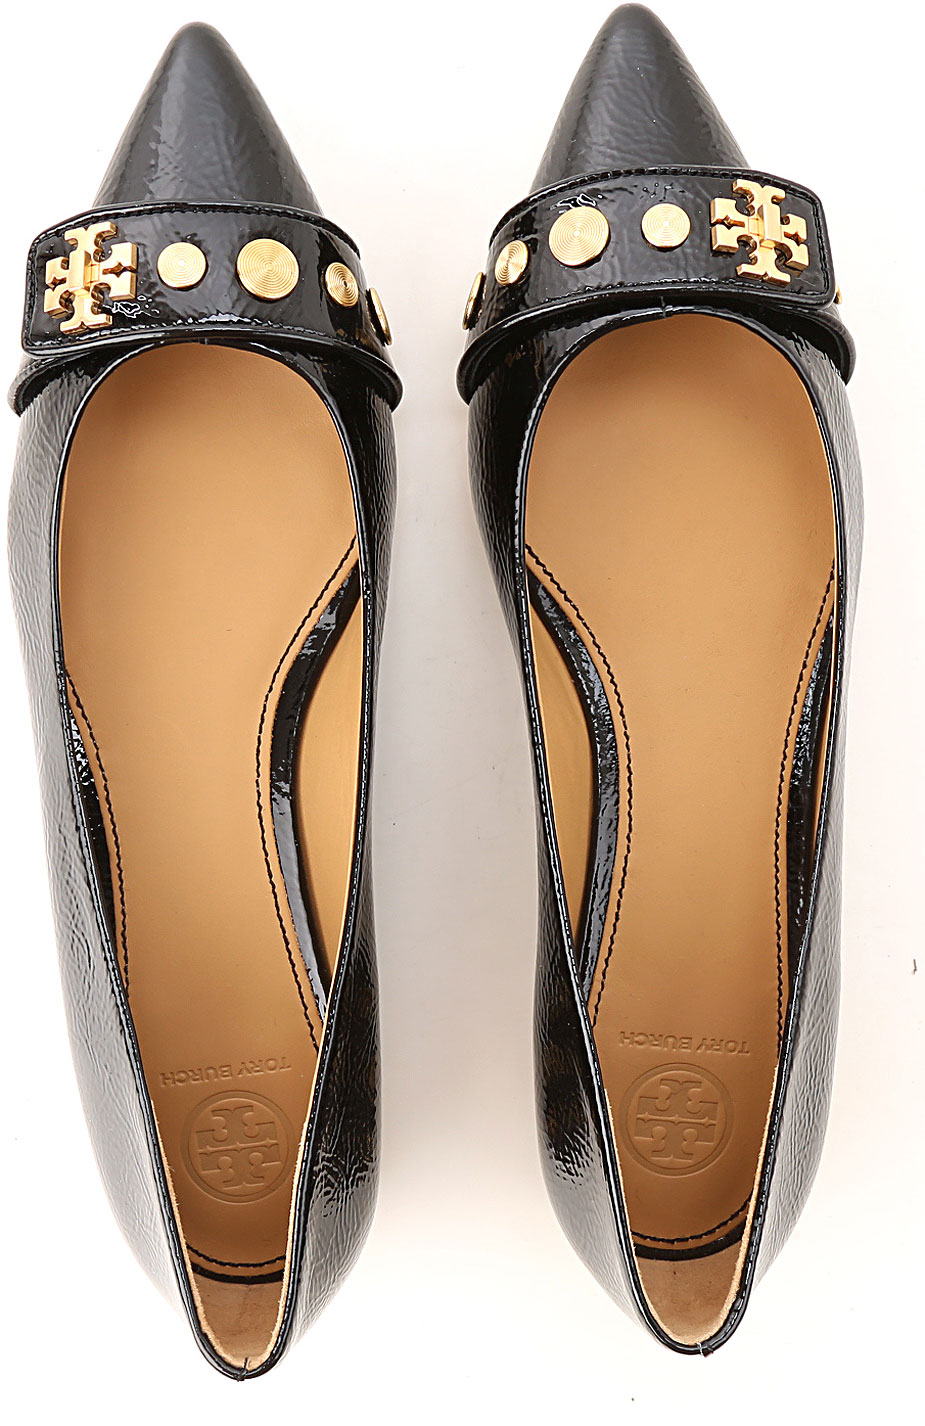 Womens Shoes Tory Burch, Style code: 57514-004-